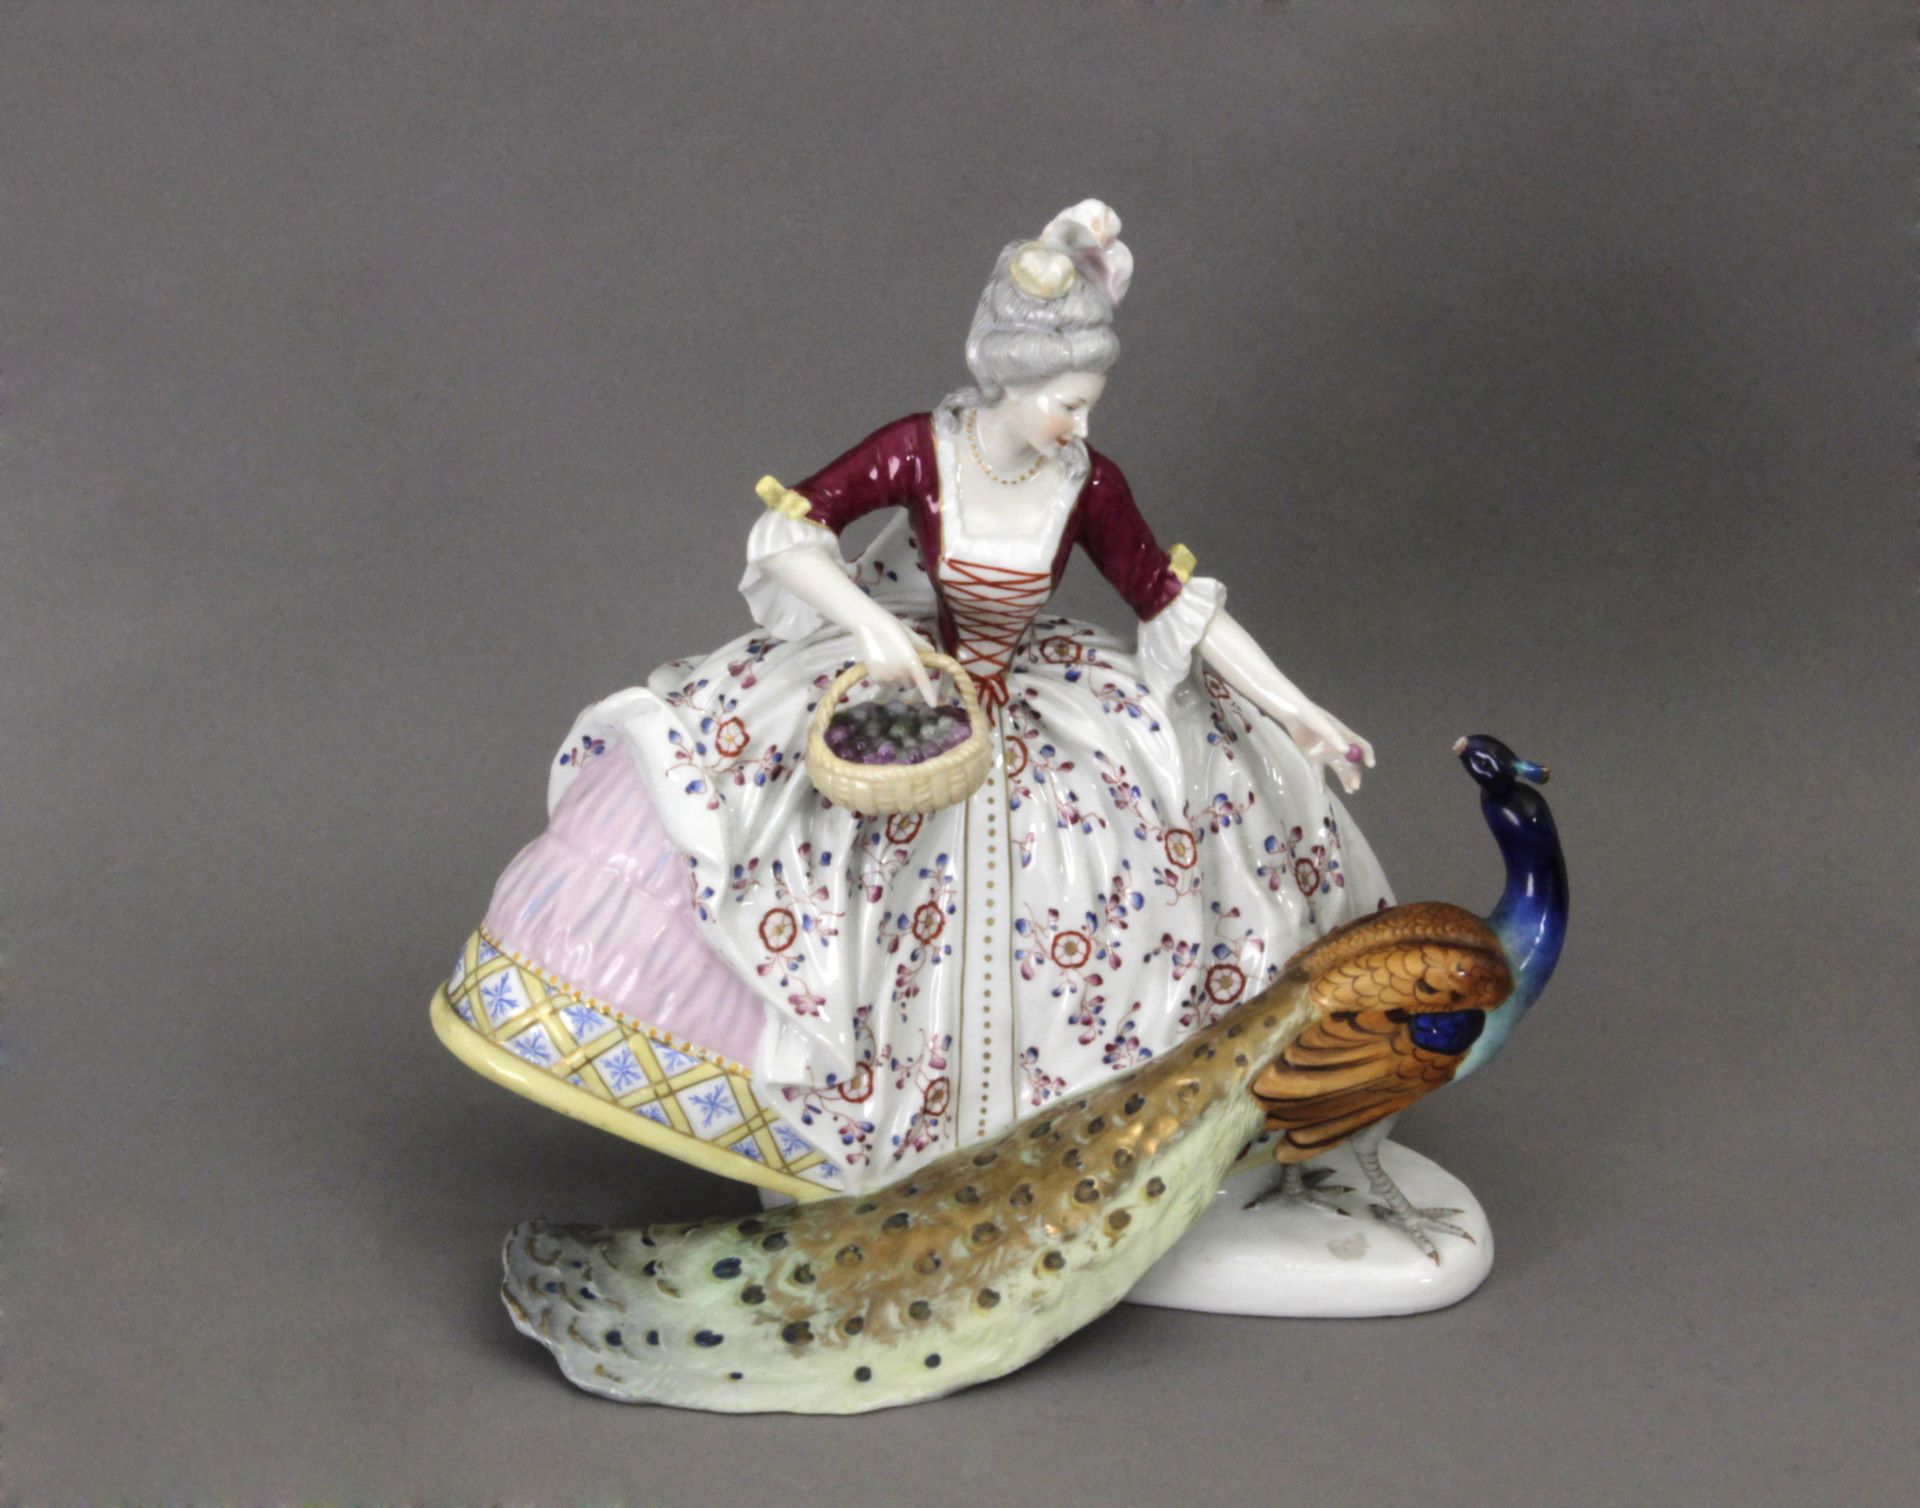 Early 20th century dame figurine in German porcelain signed A. Berger